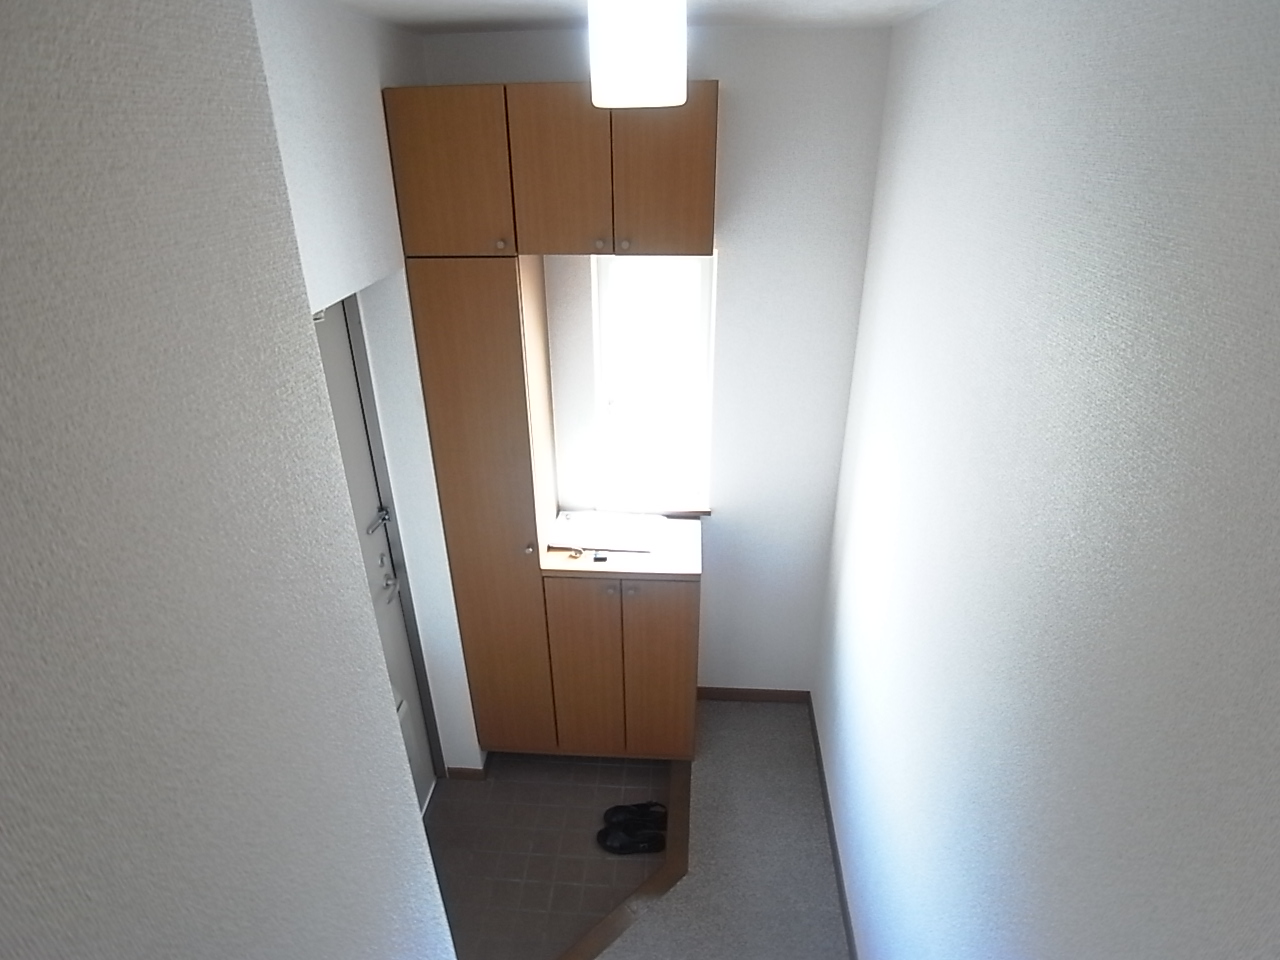 Entrance. Large cupboard! And it can be evoked because there is a window ◎